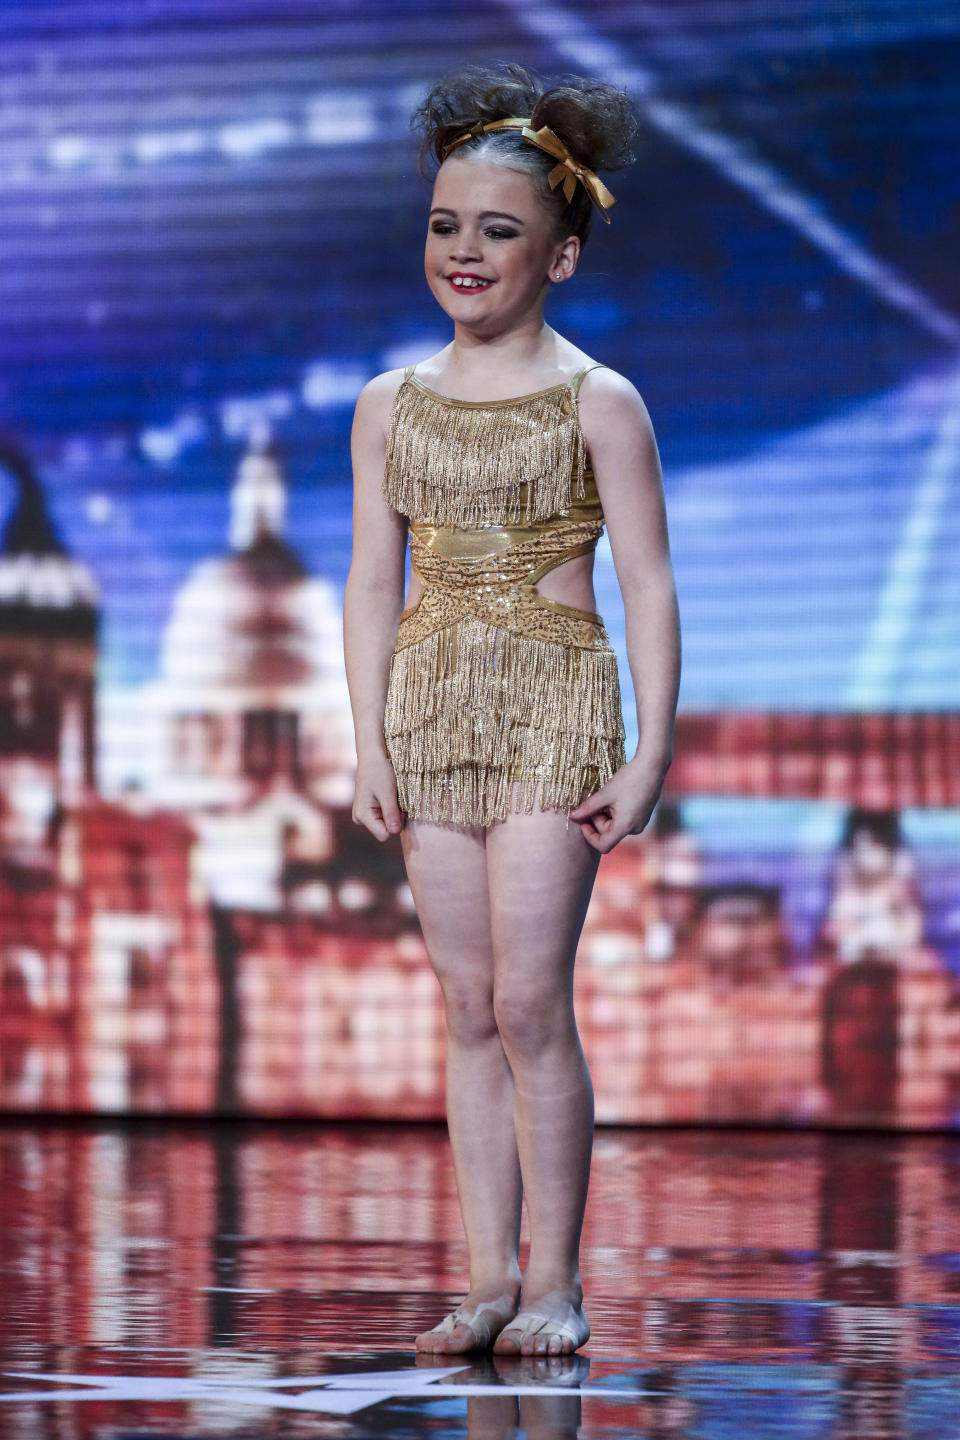 Chloe Fenton is a 10 year-old student and dancer from Liverpool where she lives with her parents, her brother and their pug Coco. Chloe is obsessed with dancing and started having lessons when she was a toddler. The judges were blown away by her energy and confidence and gave her four yeses.